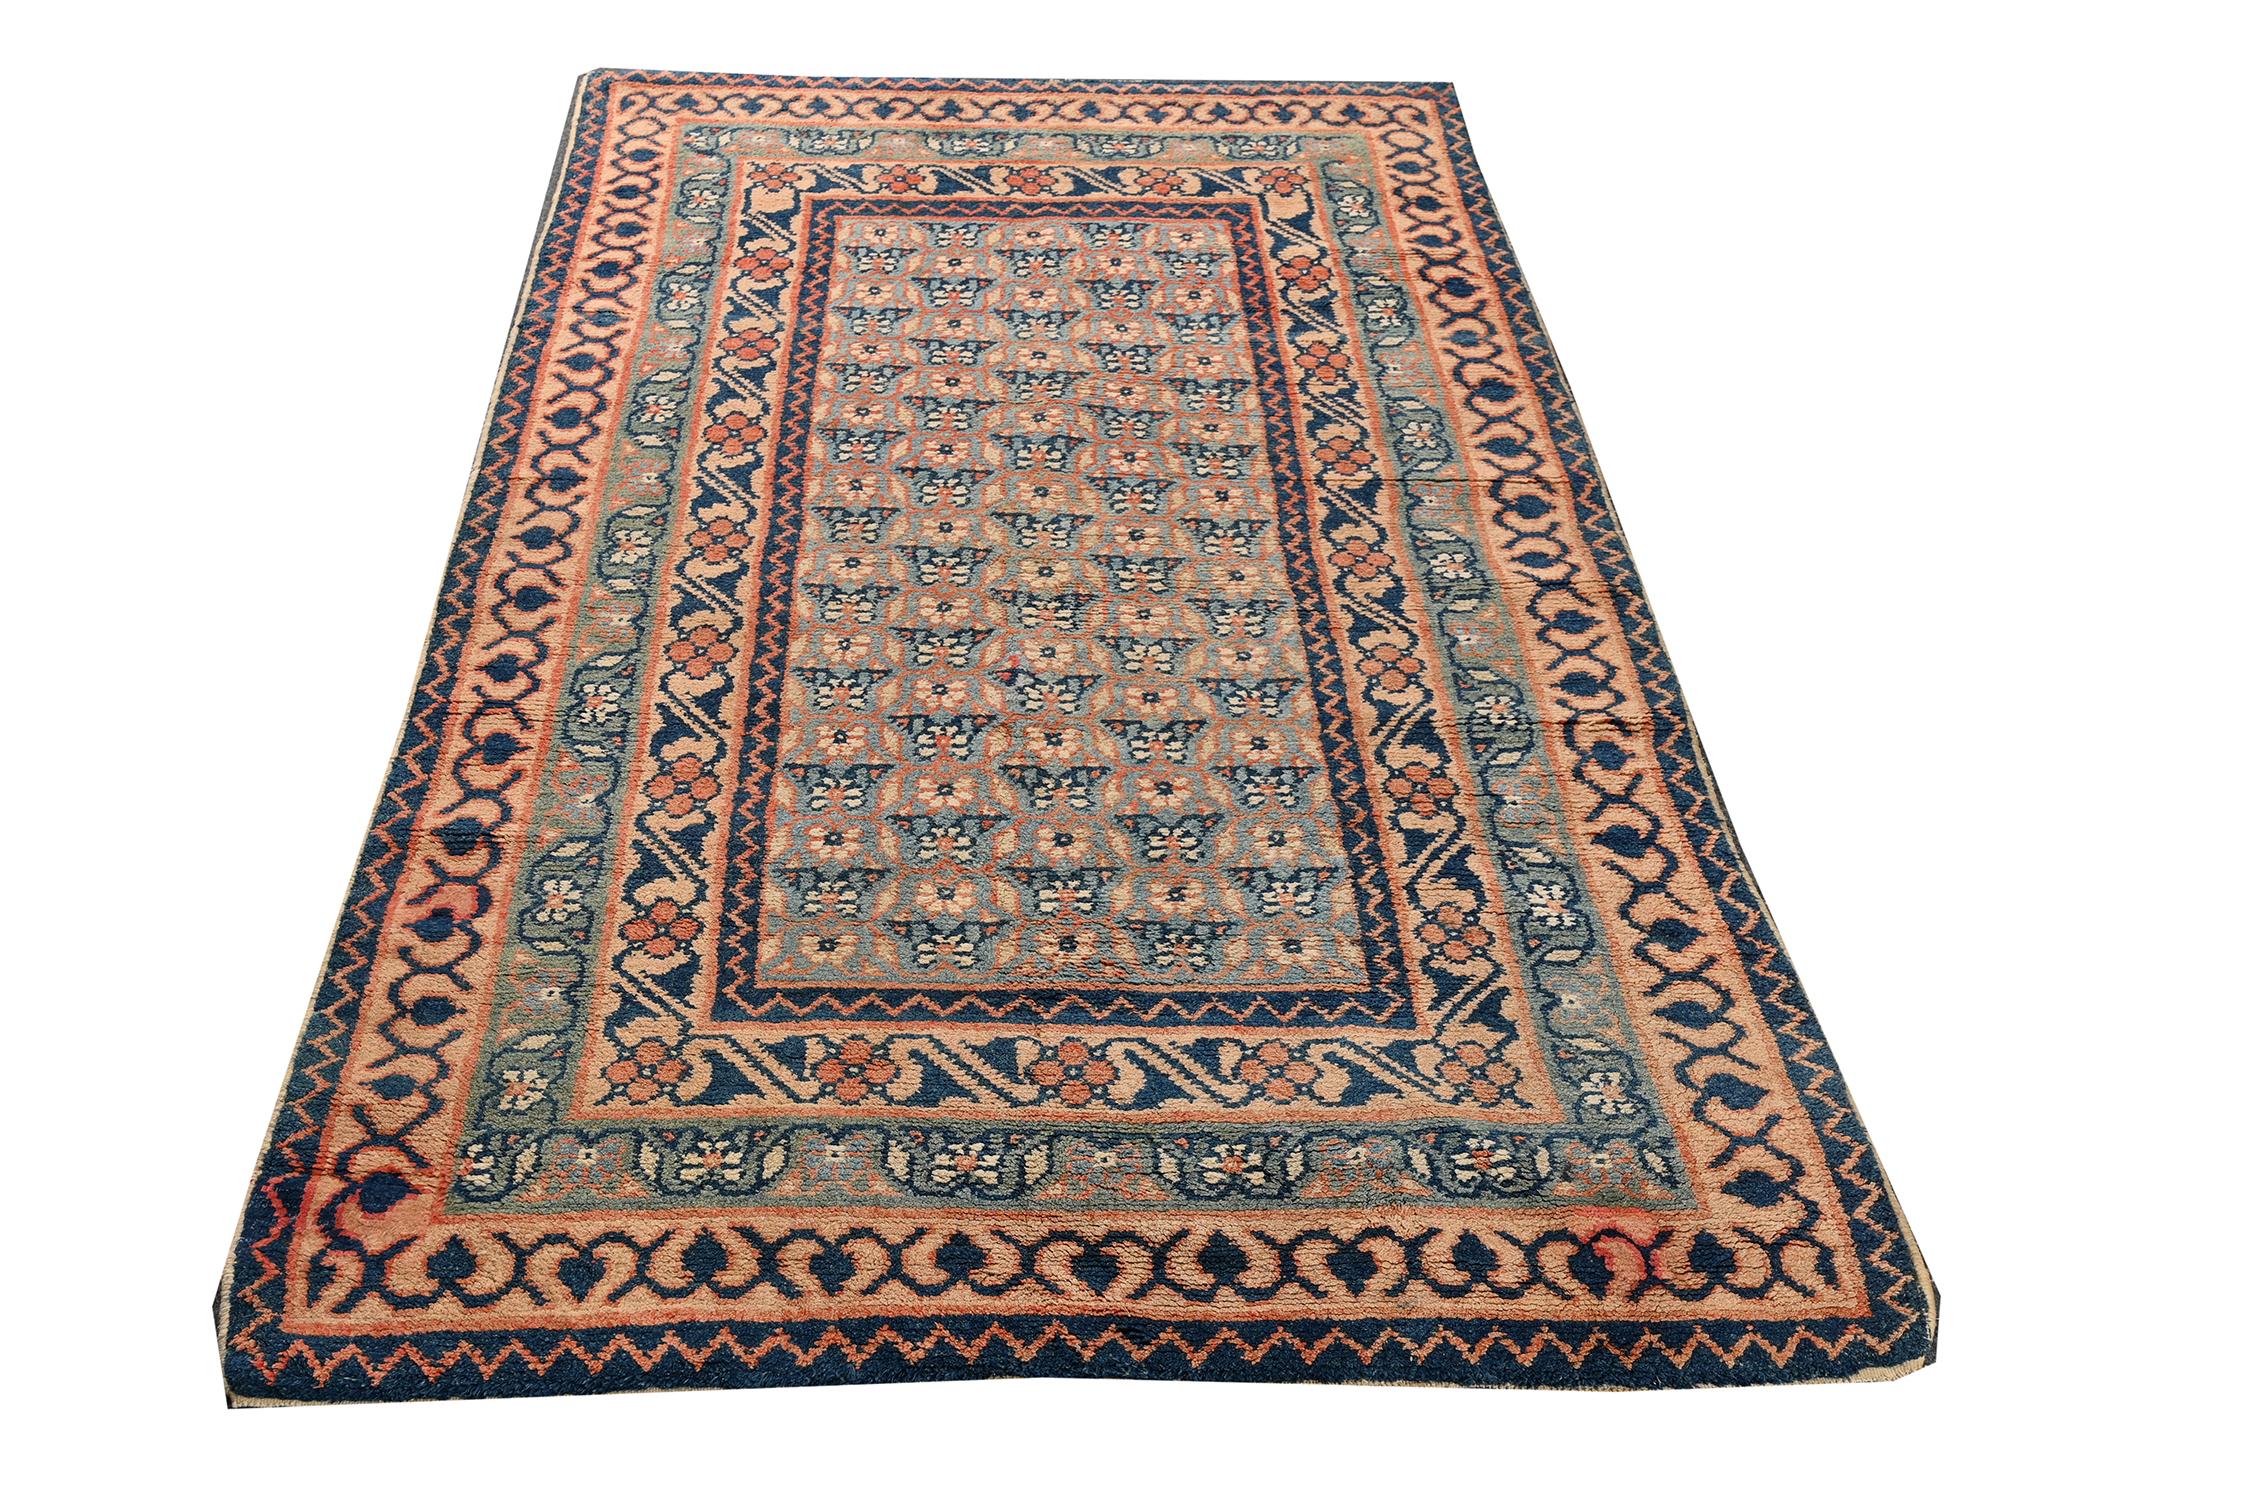 This vintage 4x7 Dhurrie is an exciting new entry in Rug & Kilim's esteemed flat weave collection. Handwoven in cotton, it originates from India circa 1950-1960. 

Further on the Design:

This flat weave favors elaborate florals in beige-brown,